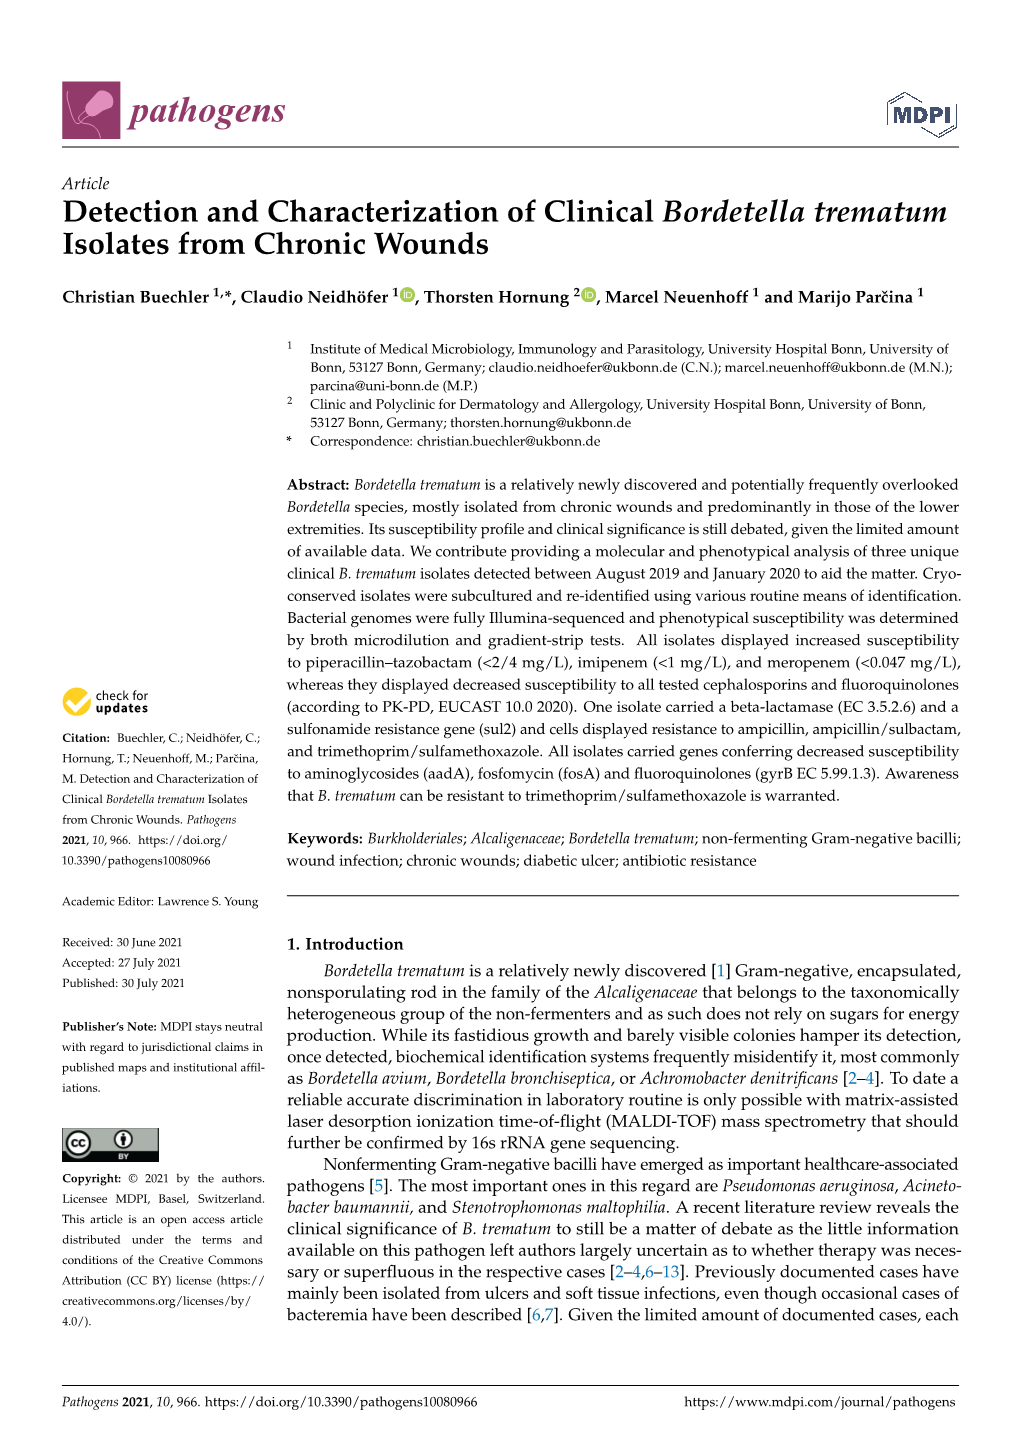 Detection and Characterization of Clinical Bordetella Trematum Isolates from Chronic Wounds